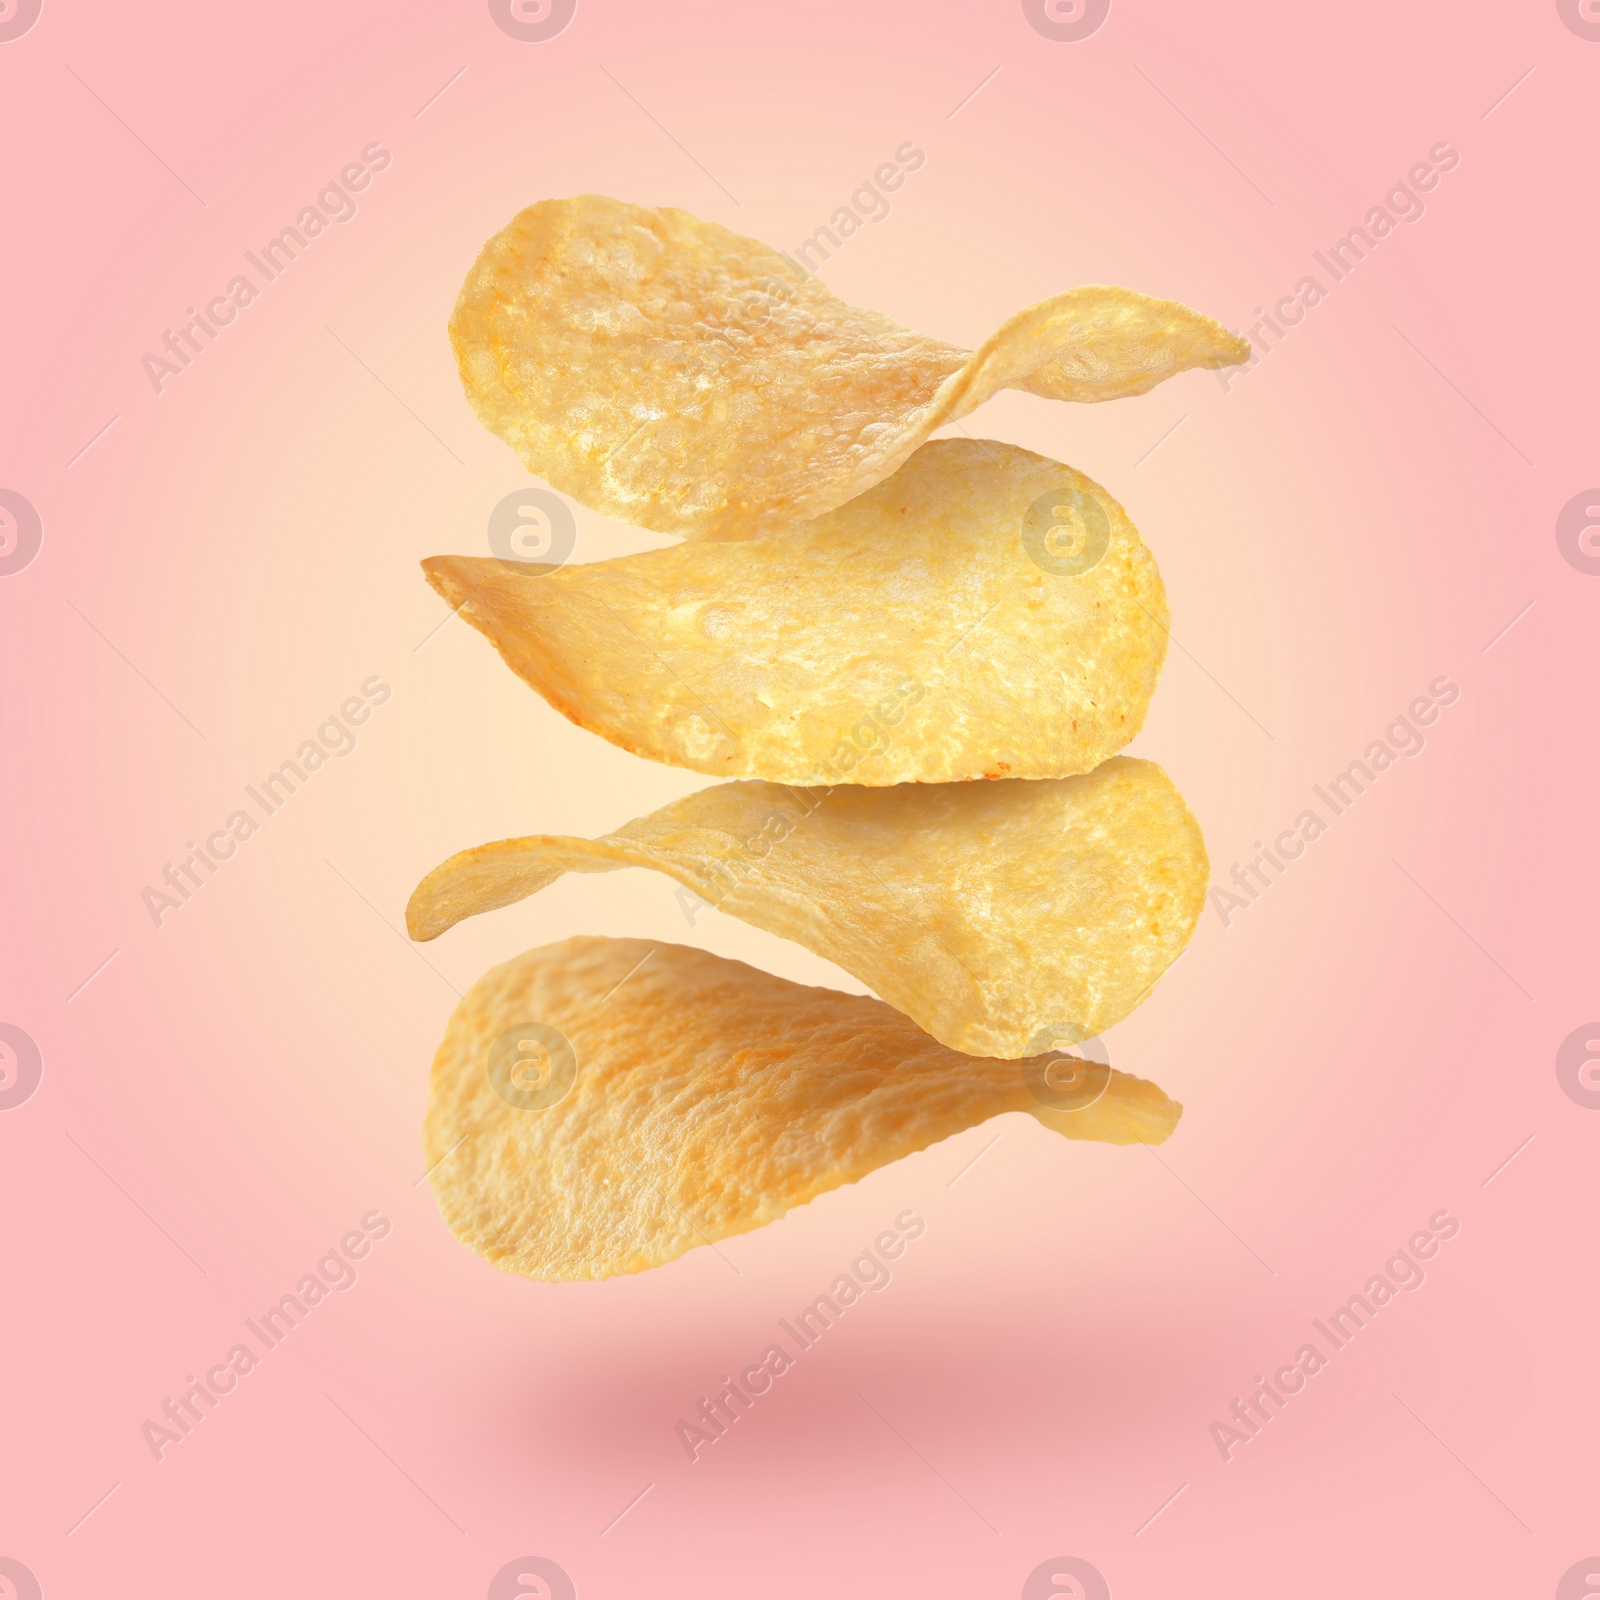 Image of Stack of tasty potato chips falling on pink background